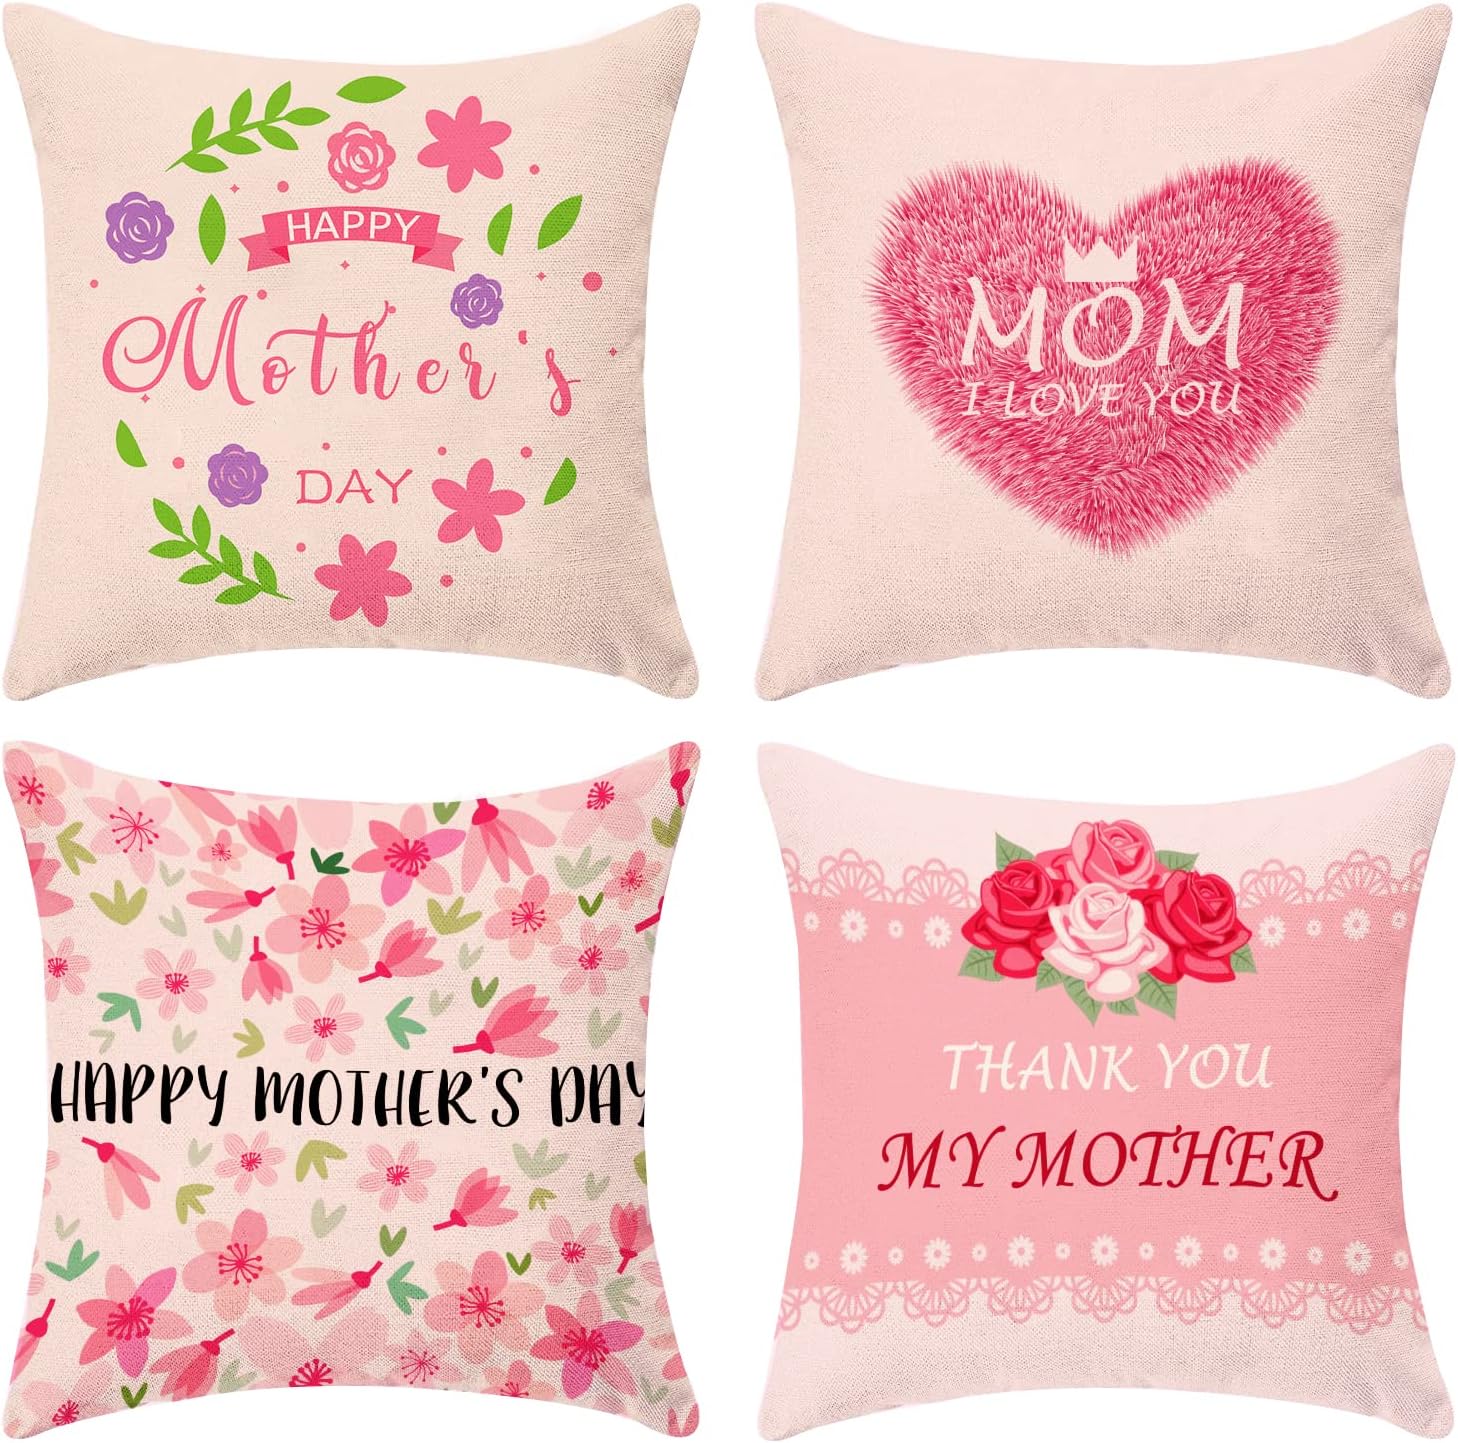 Mother's Day Pillow Covers 18x18 Inch Set of 4 Spring Flower Leaf Heart Decorative Pillow Cover Mother's Day Pillowcase Gift for Mom Farmhouse Linen Pillow Cushion Case for Sofa Bed Couch, Pink